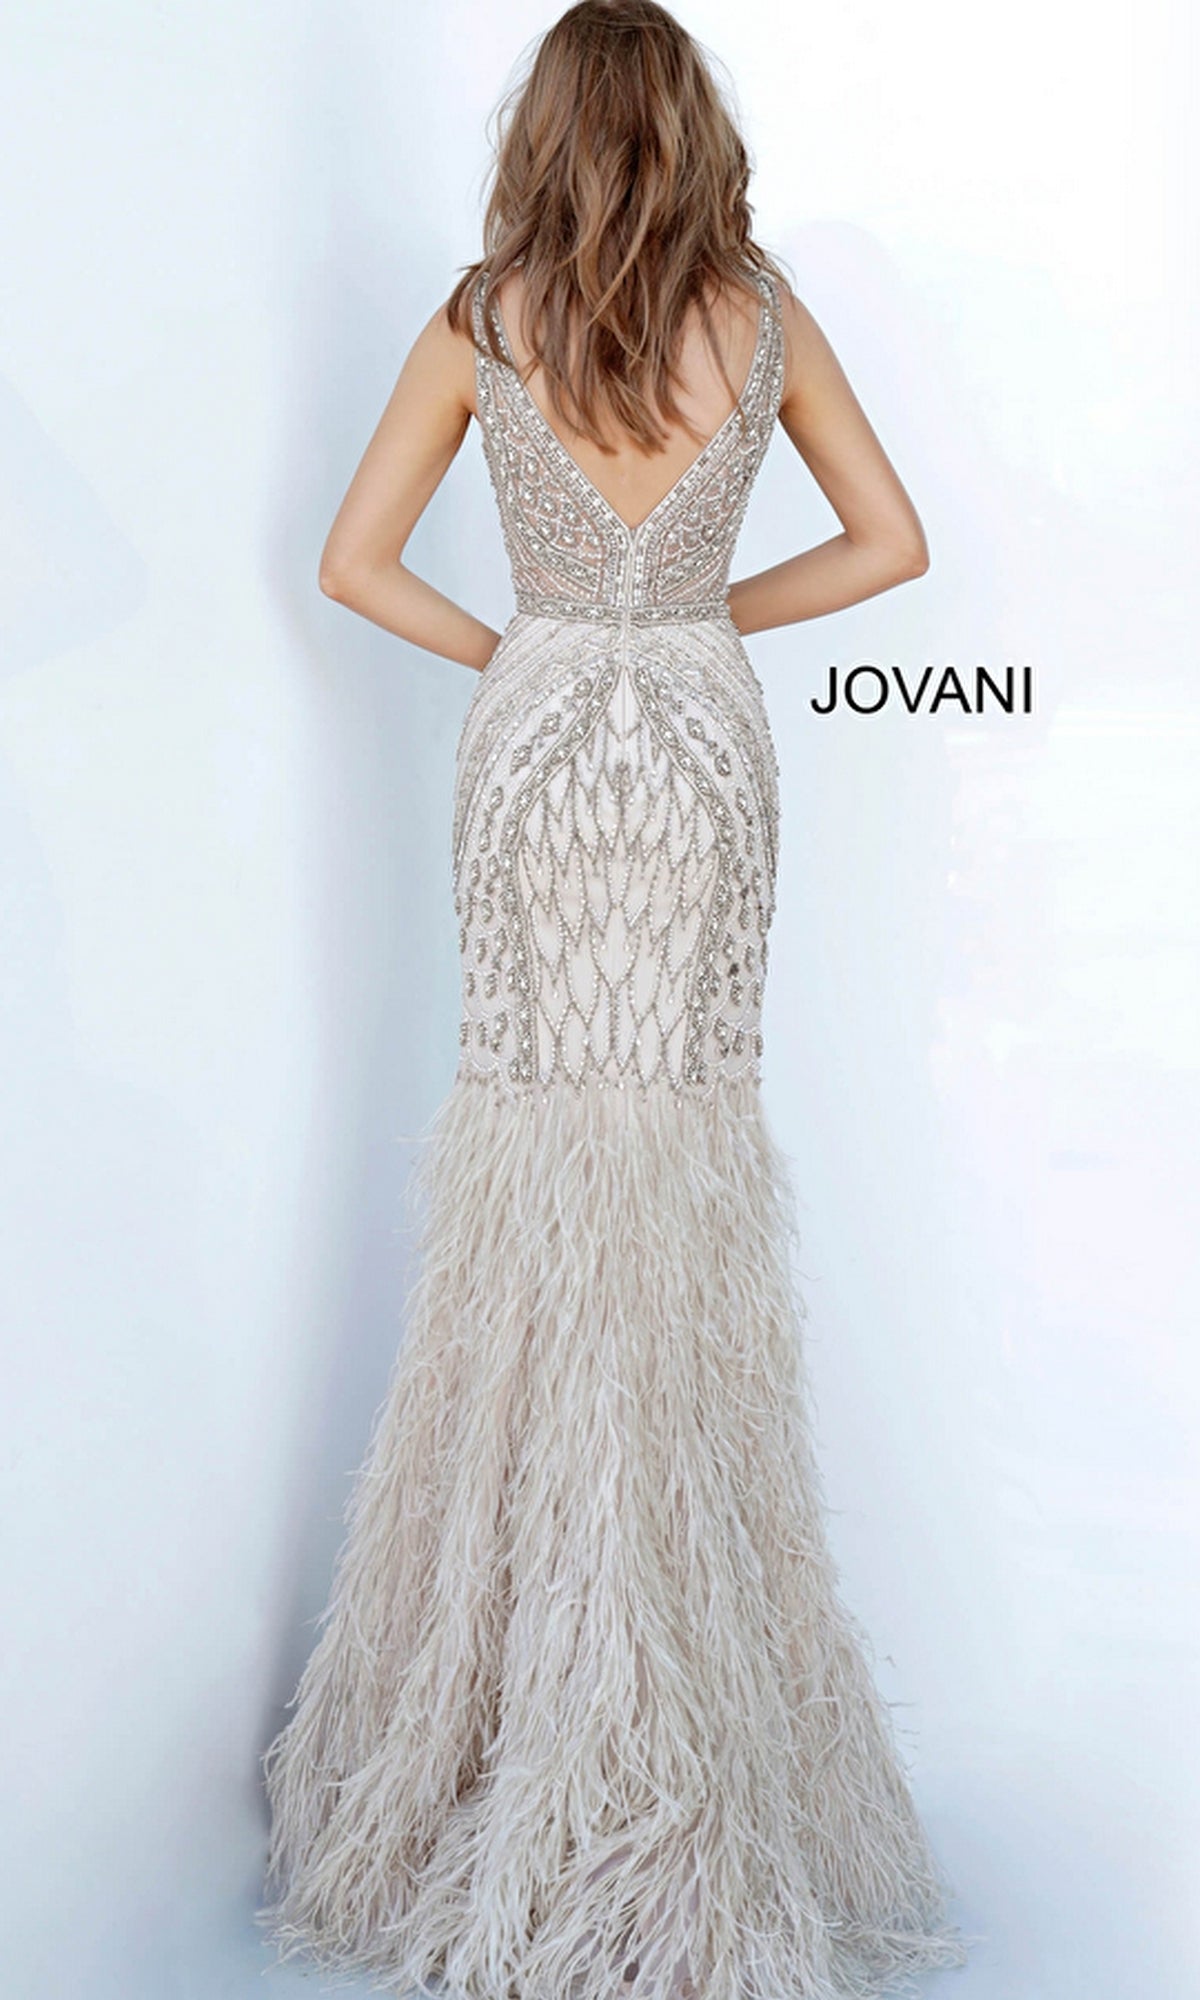 Sleeveless V-Neck Silver Feather Mermaid Gown 02798